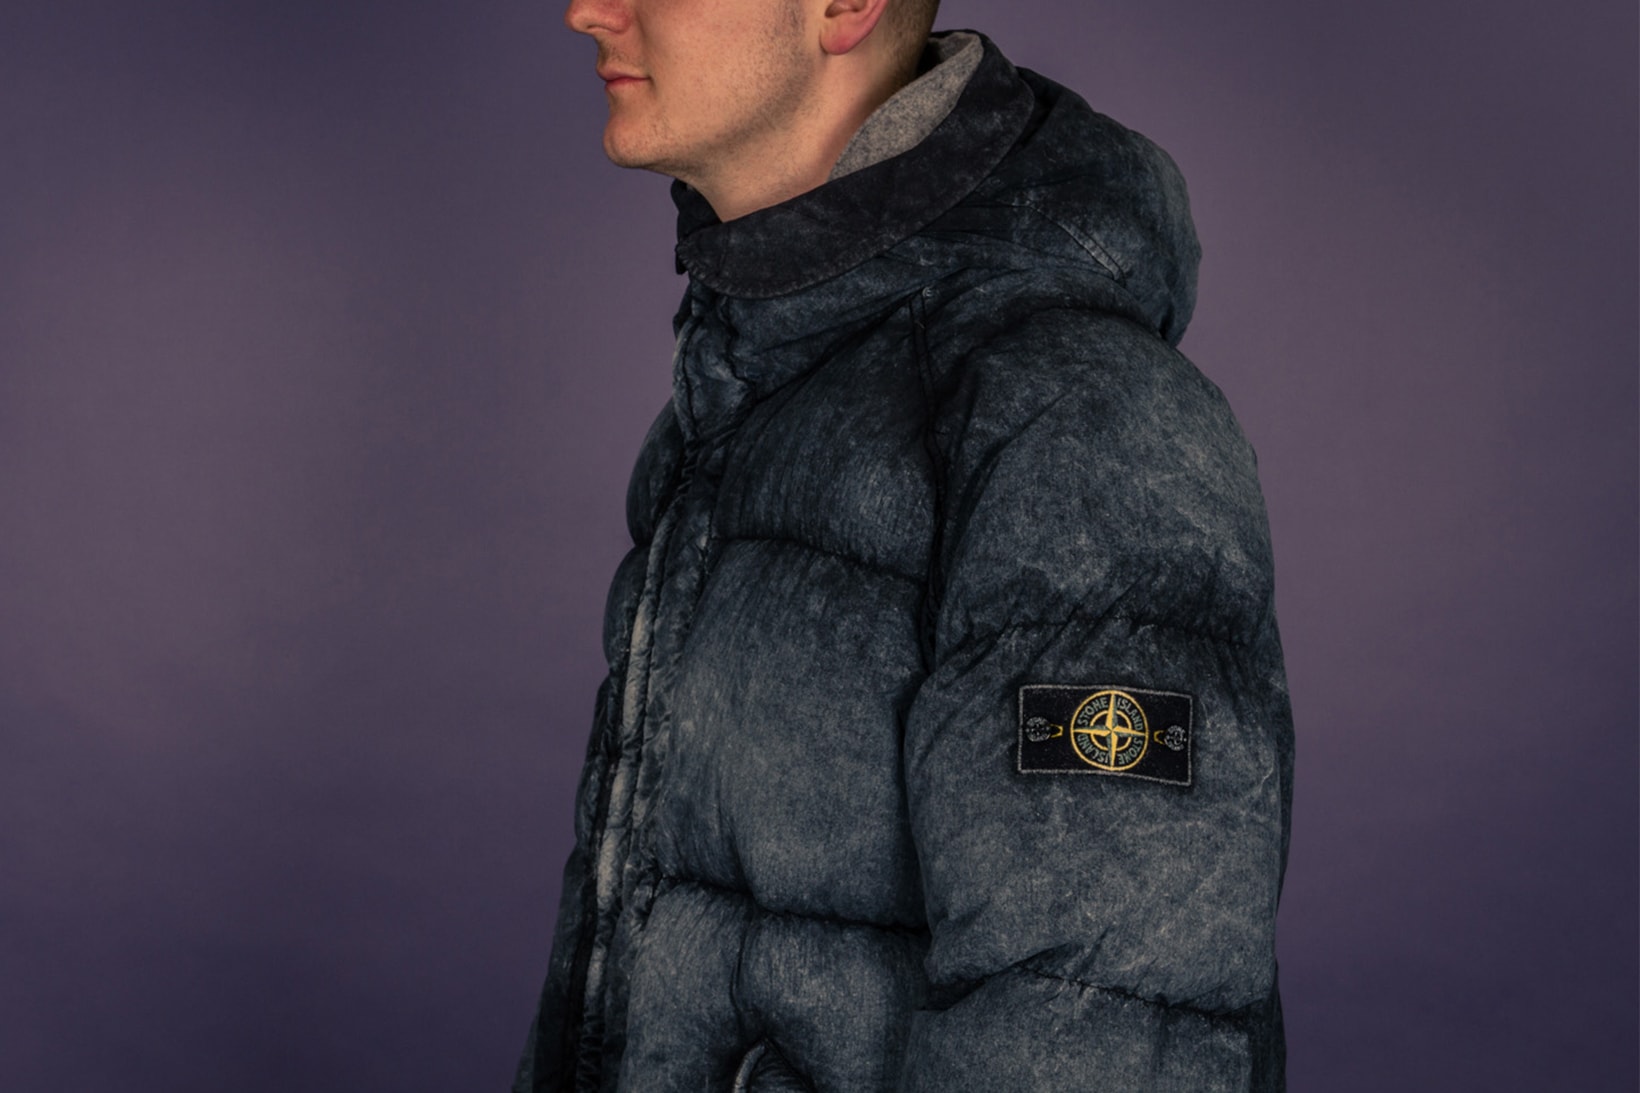 Stone Island 2017 Fall Winter "Frost" Collection Lookbook